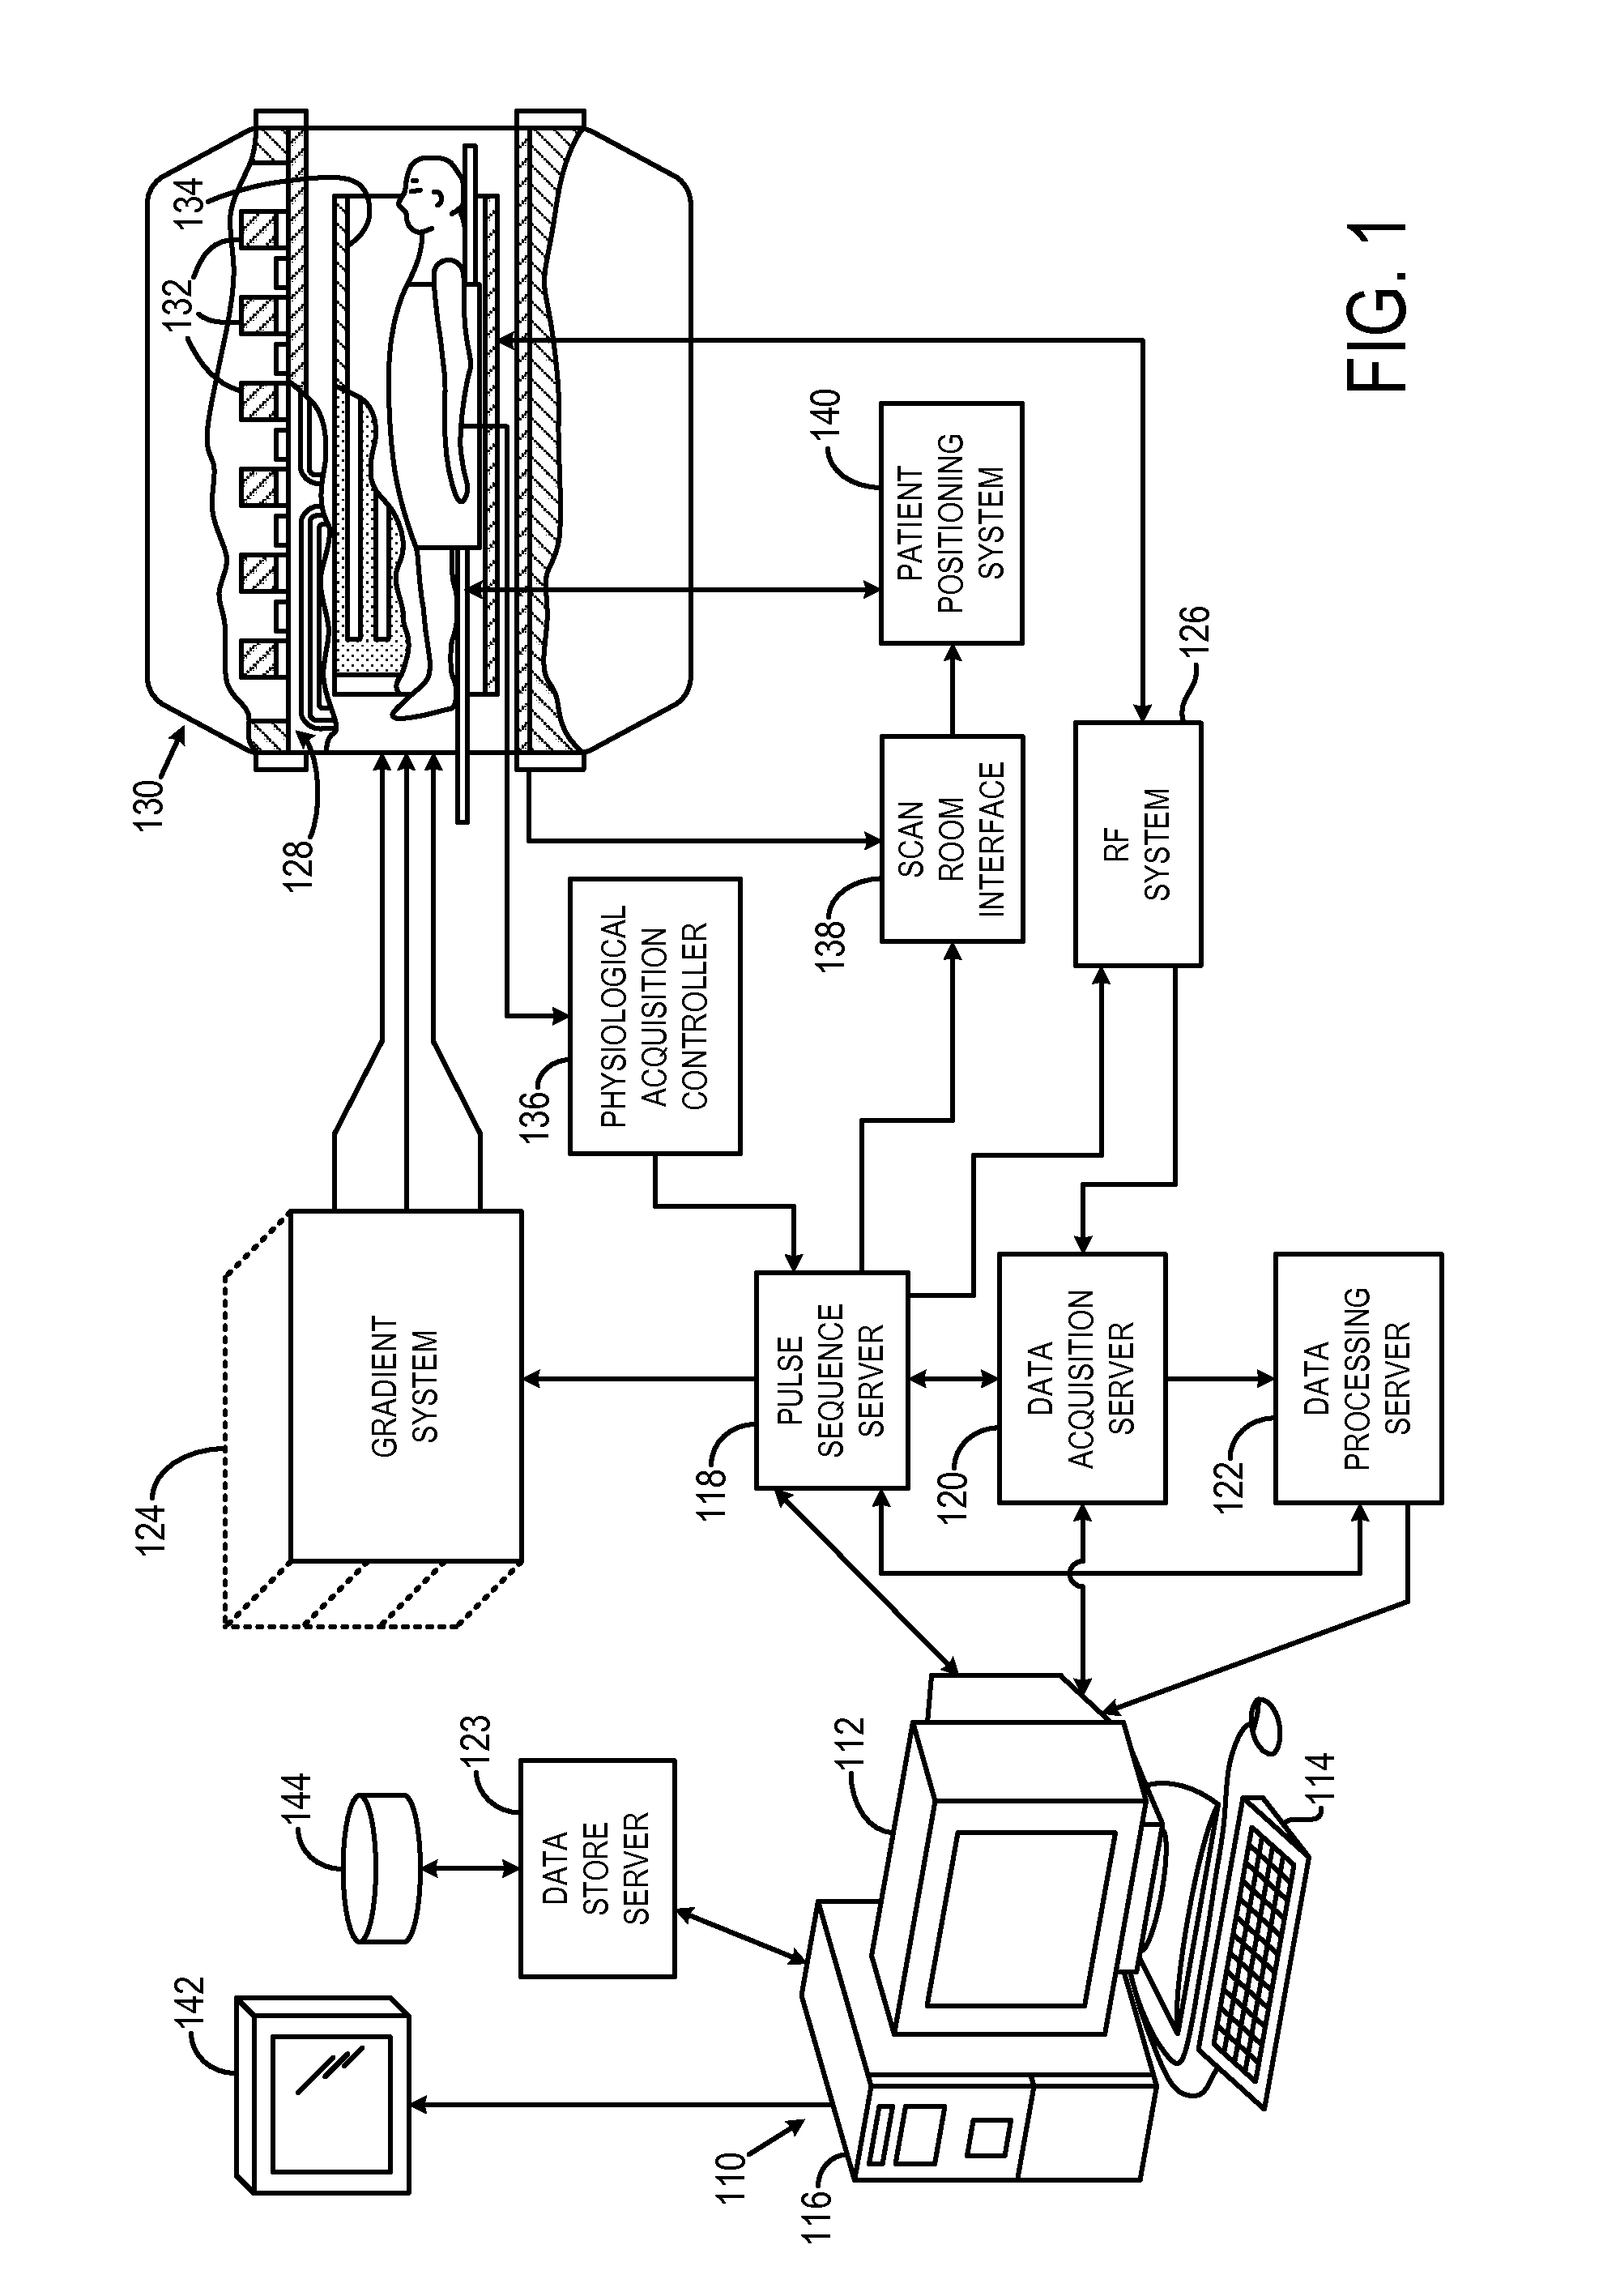 Method for magnitude constrained phase contrast magnetic resonance imaging